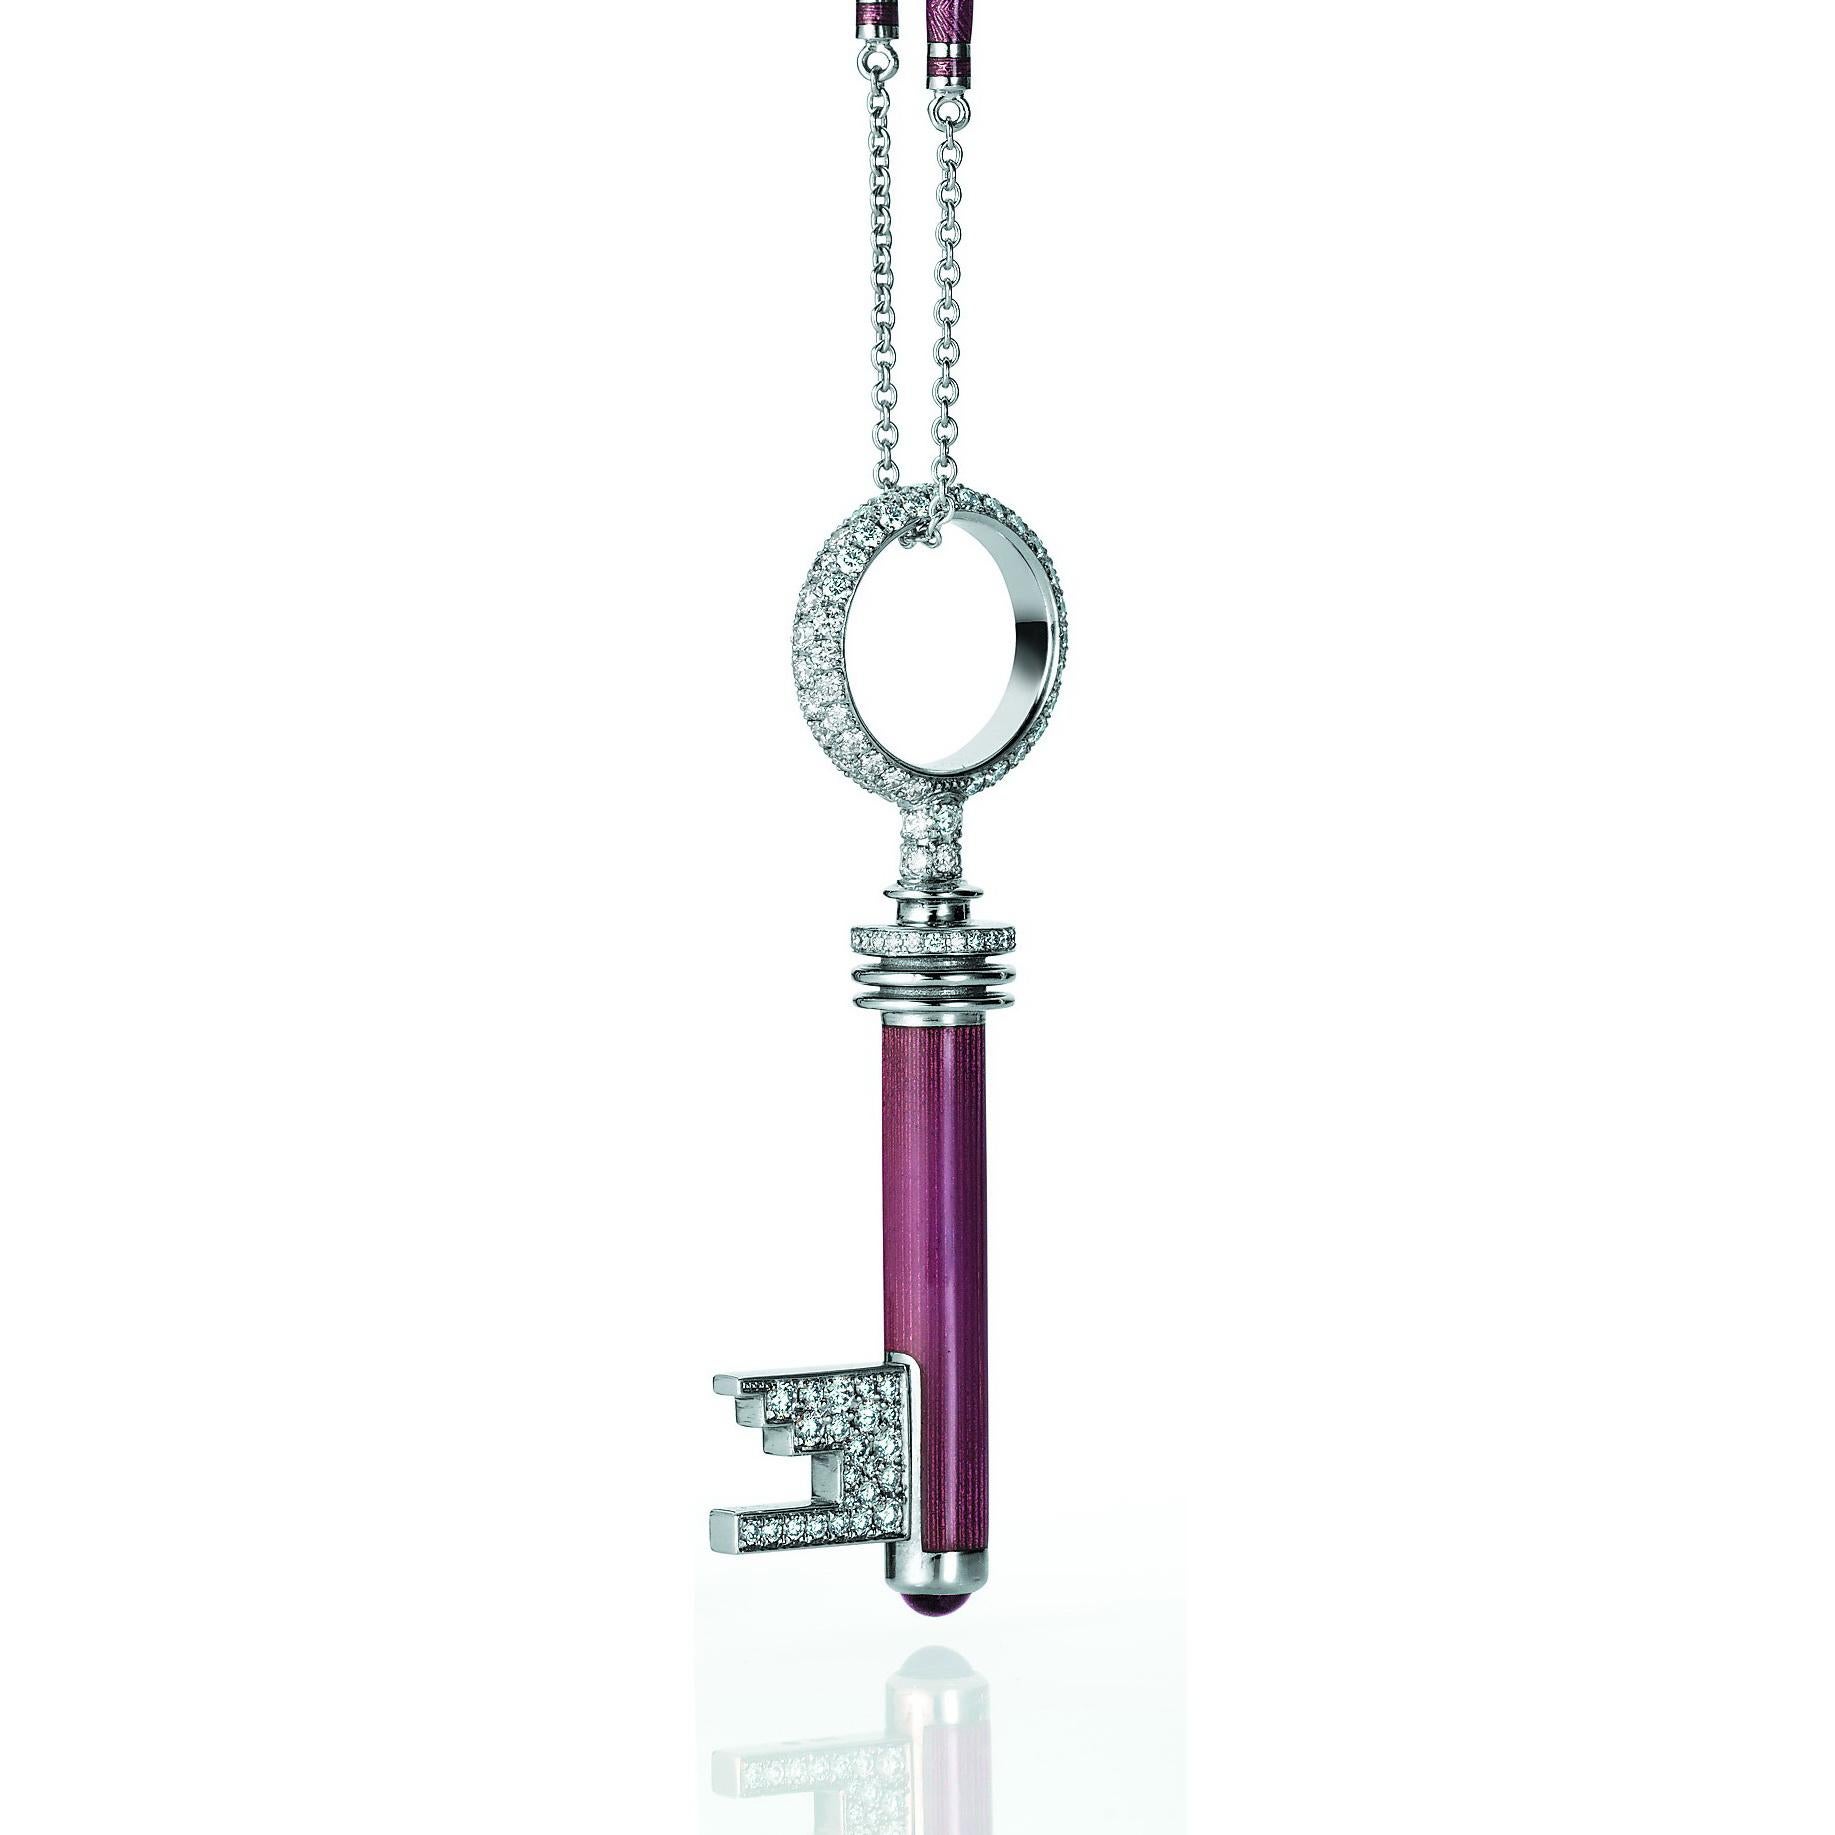 Victor Mayer key pendant necklace 18k white gold, pink vitreous enamel, 162 diamonds, total 1.90 ct, G VS brilliant cut, amethyst cabichon, modelled after an original safe key from VICTOR MAYER from the 1920ies.  

About the creator Victor